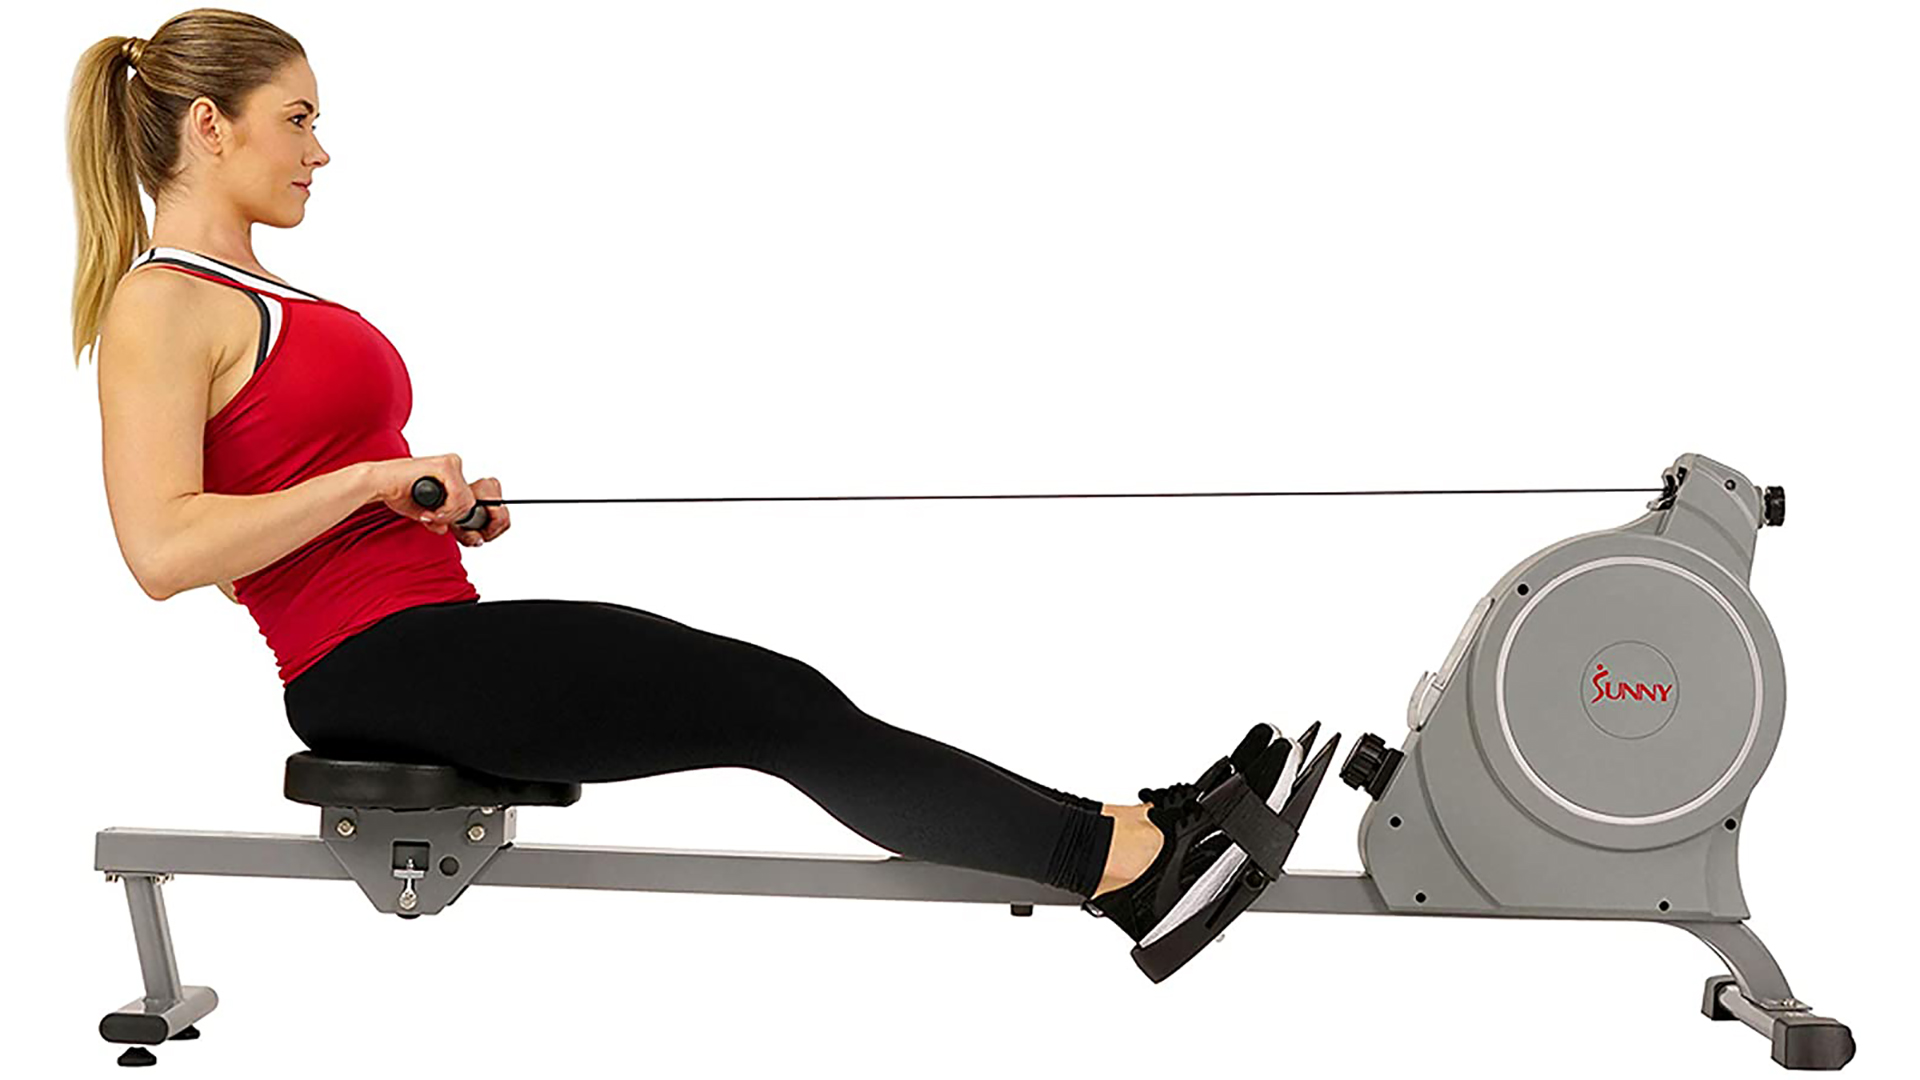 Best rowing machines 2021: Product image of Sunny Health and Fitness